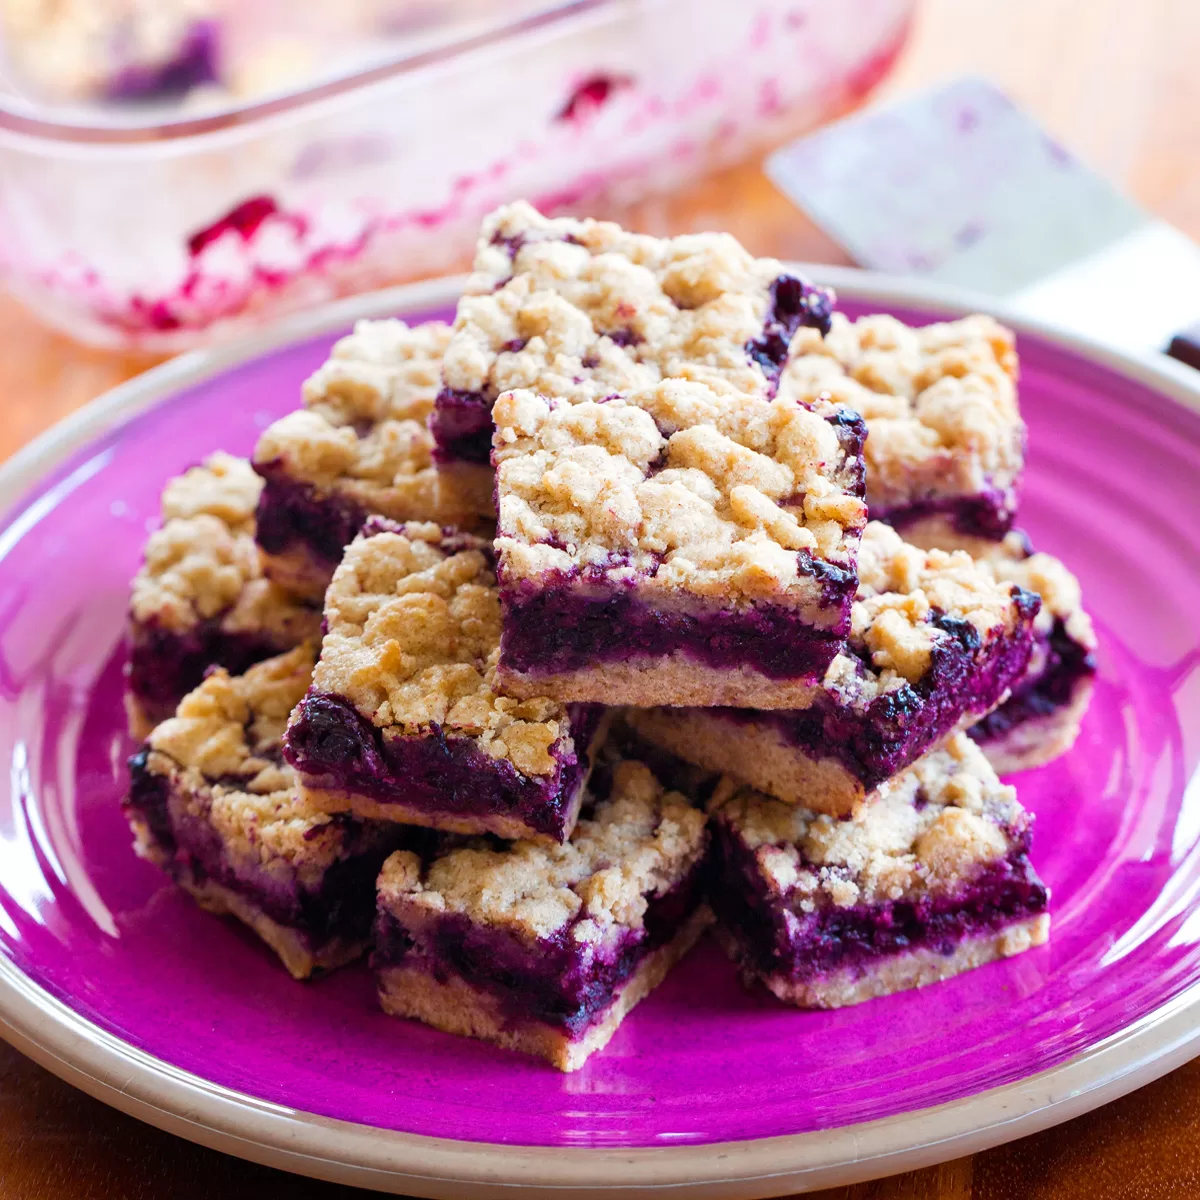 Blueberry Bars Recipe – with Crumble Topping